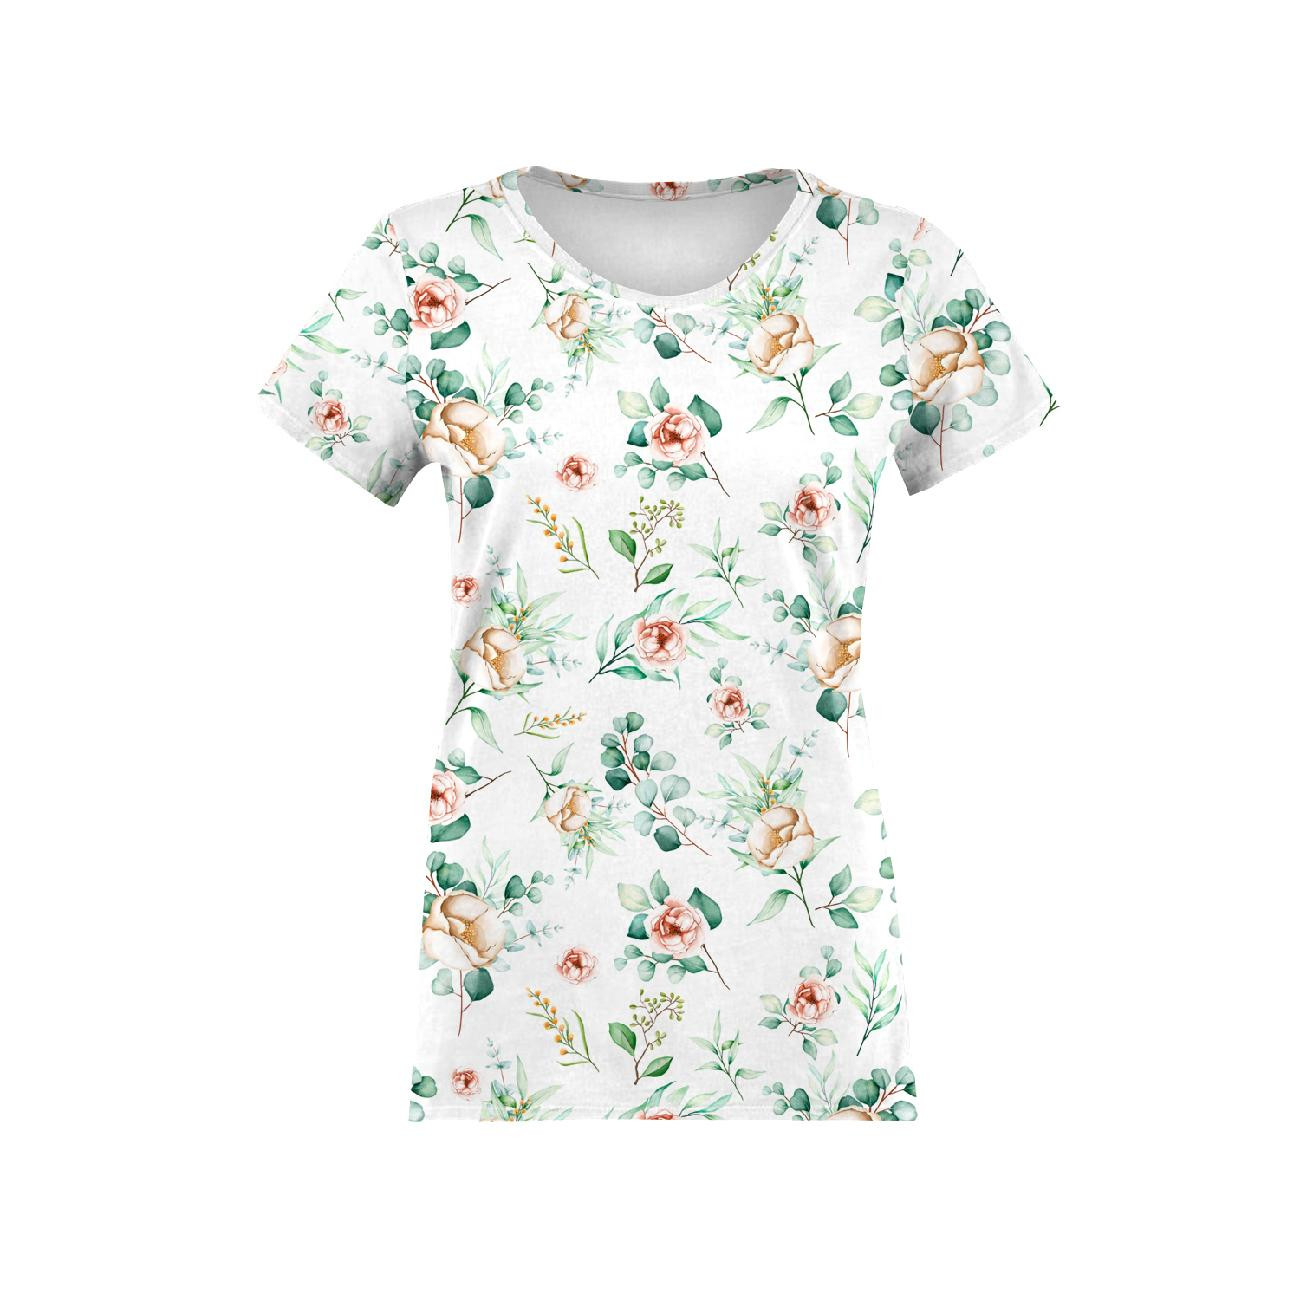 WOMEN’S T-SHIRT - ROSES AND LEAVES PAT. 2 - single jersey